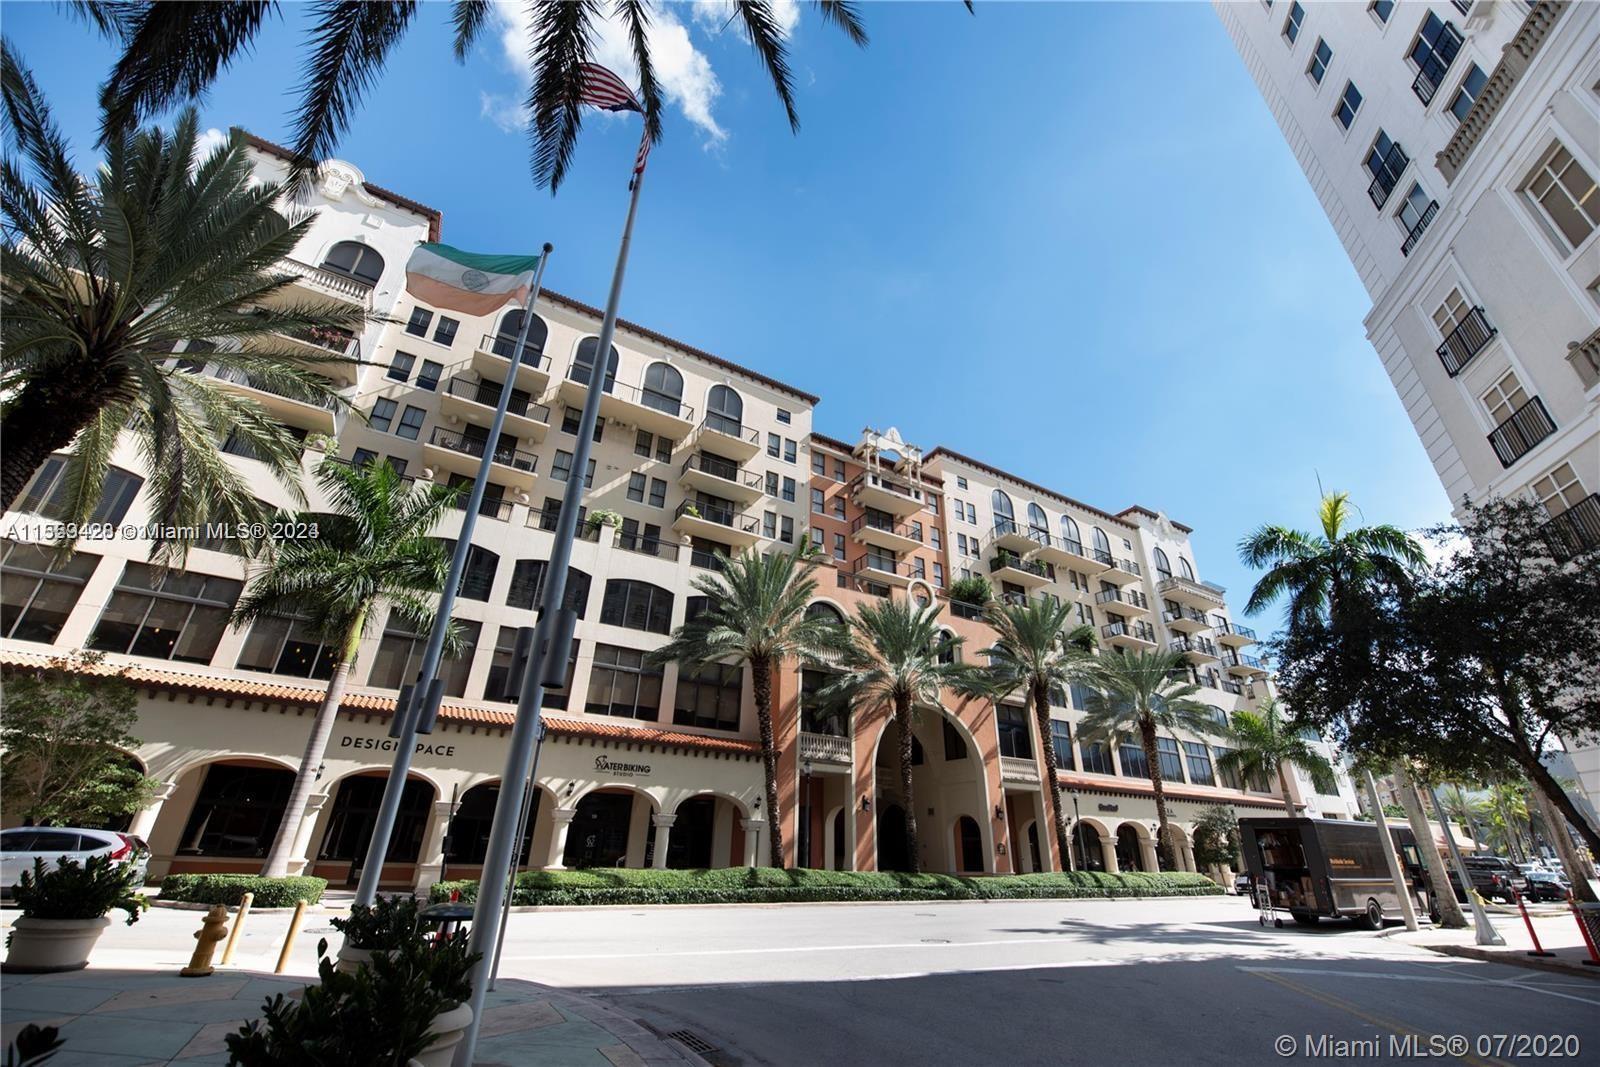 Spacious 1 Bedroom 1.5 Bathroom with 2 assigned parking spaces. Great building in the heart of Coral Gables. Walking distance to restaurants, shops, cafes and much more.